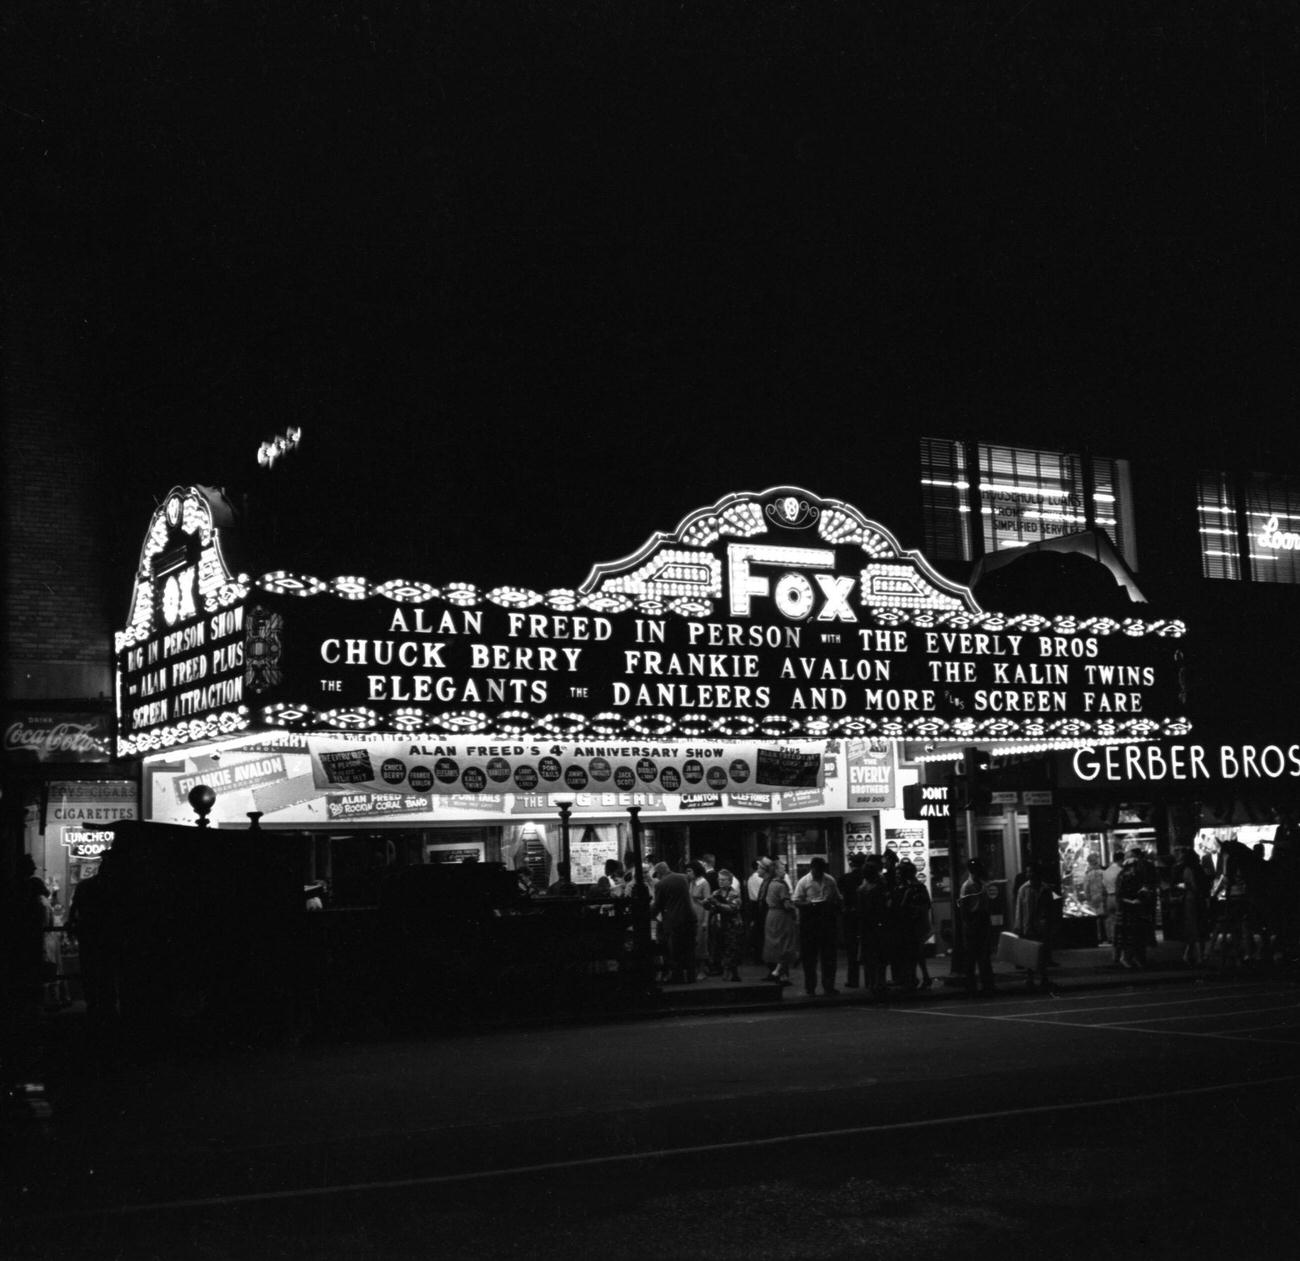 Brooklyn Fox Theater Marquee Advertising Alan Freed Show, 1958.